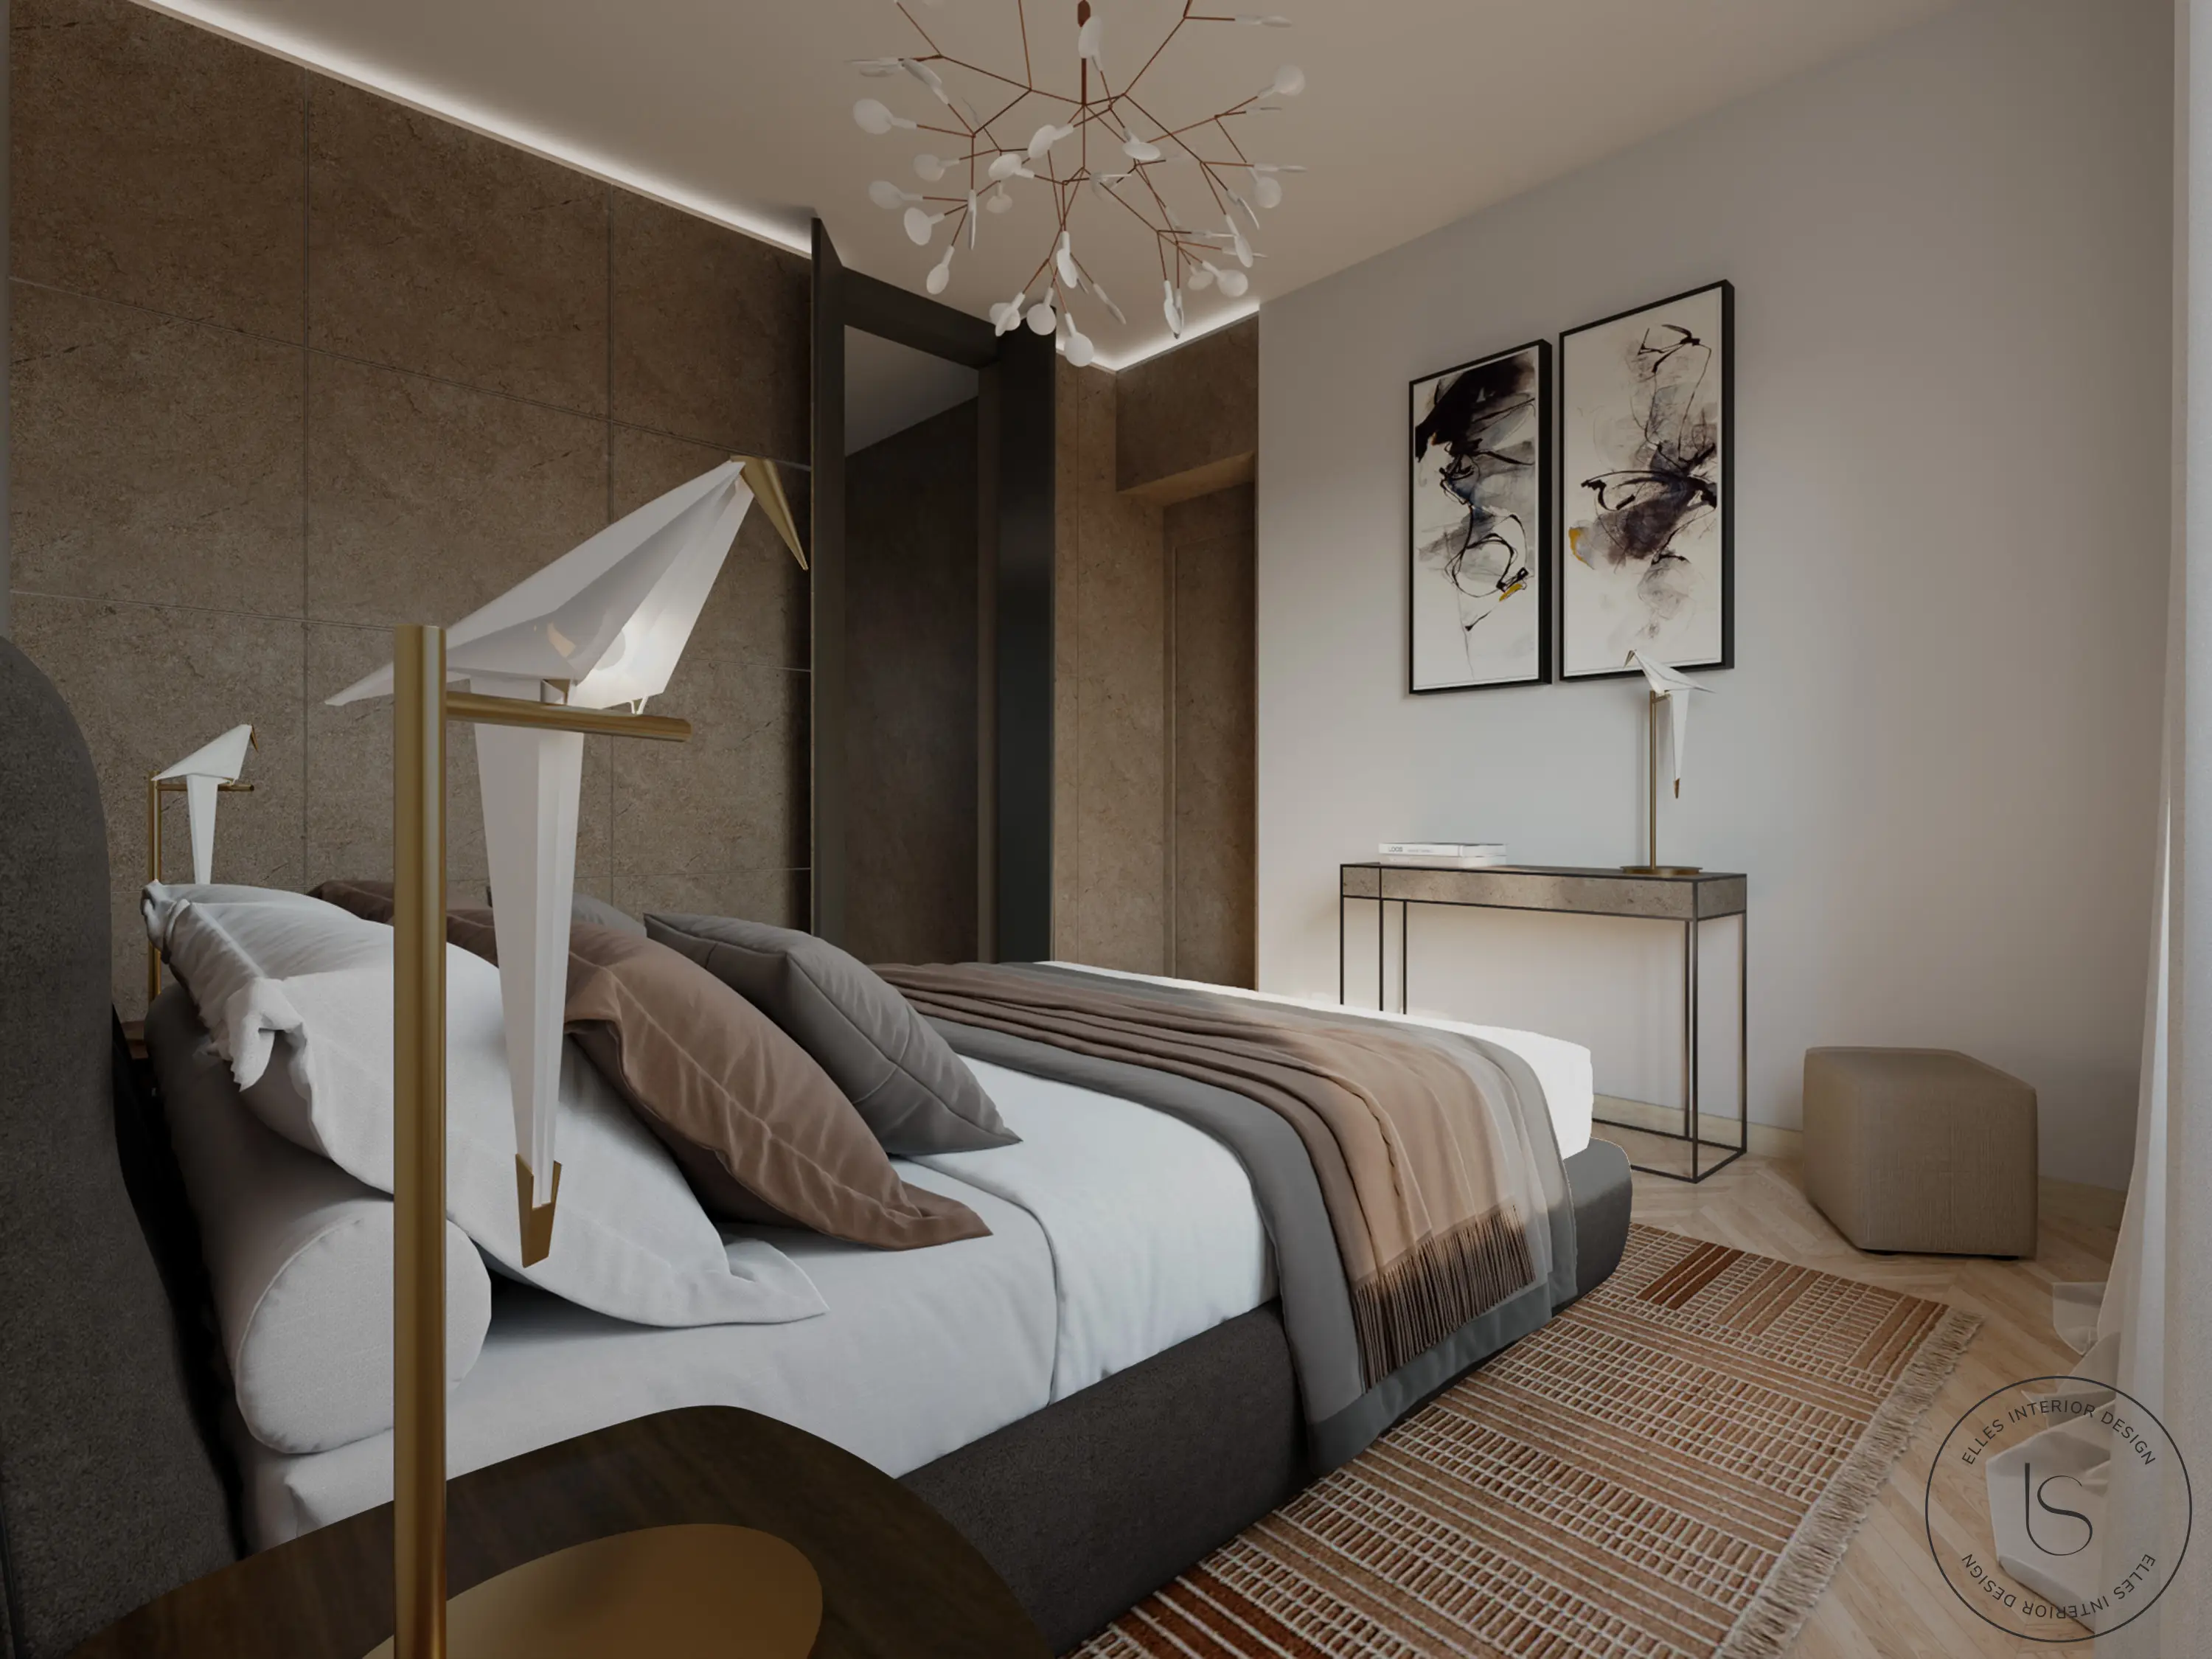 Photorealistic rendering of a bedroom with a wardrobe accessible through a door integrated in the wall panels. Project made by Elles Interior Design studio